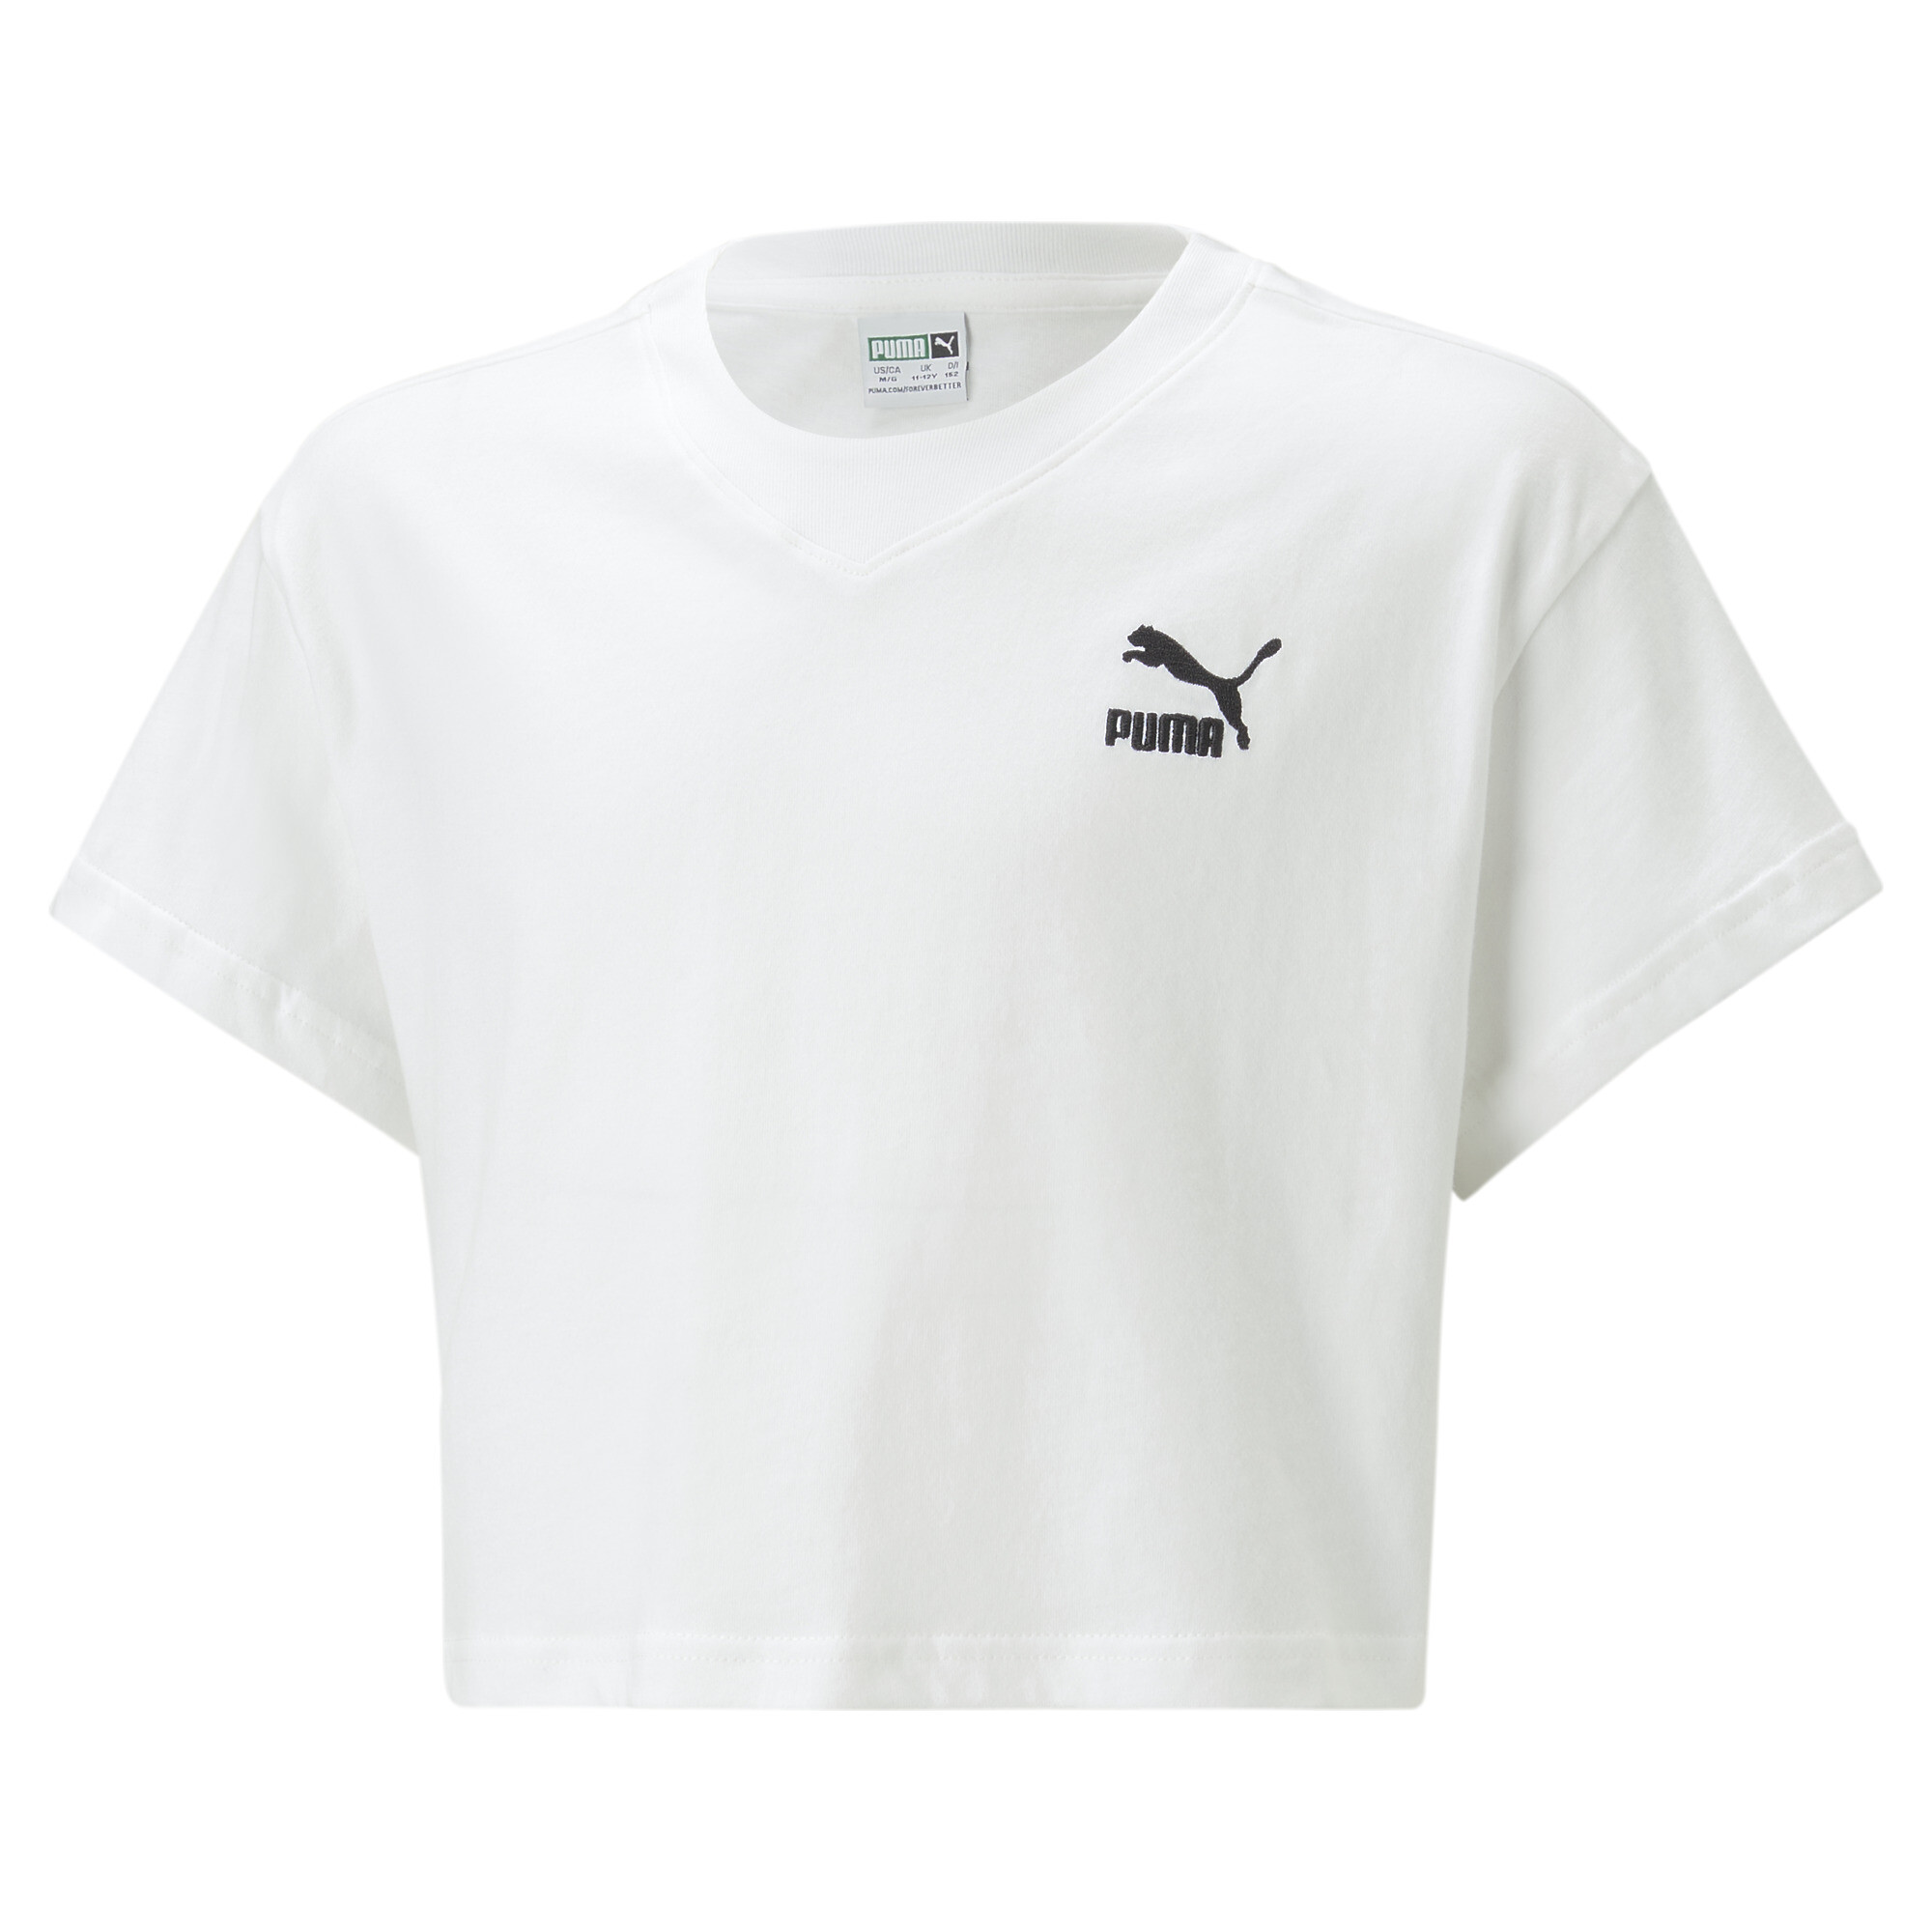 PUMA Classics T-Shirt In 20 - White, Size 13-14 Youth